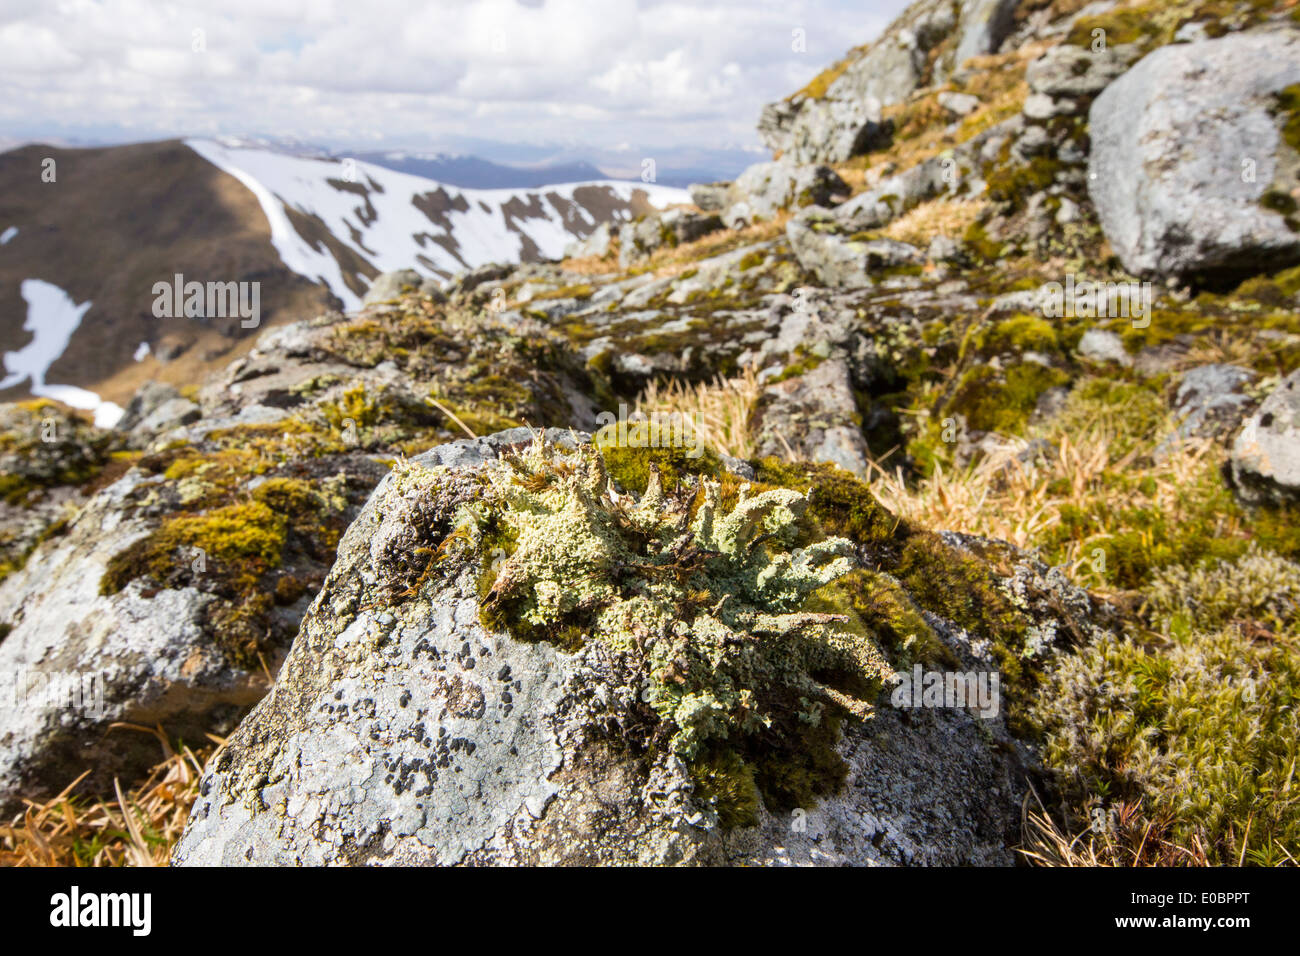 A lichen covered boulder on Beinn Ghlas, a Munro on the side of Ben Lawers. Stock Photo